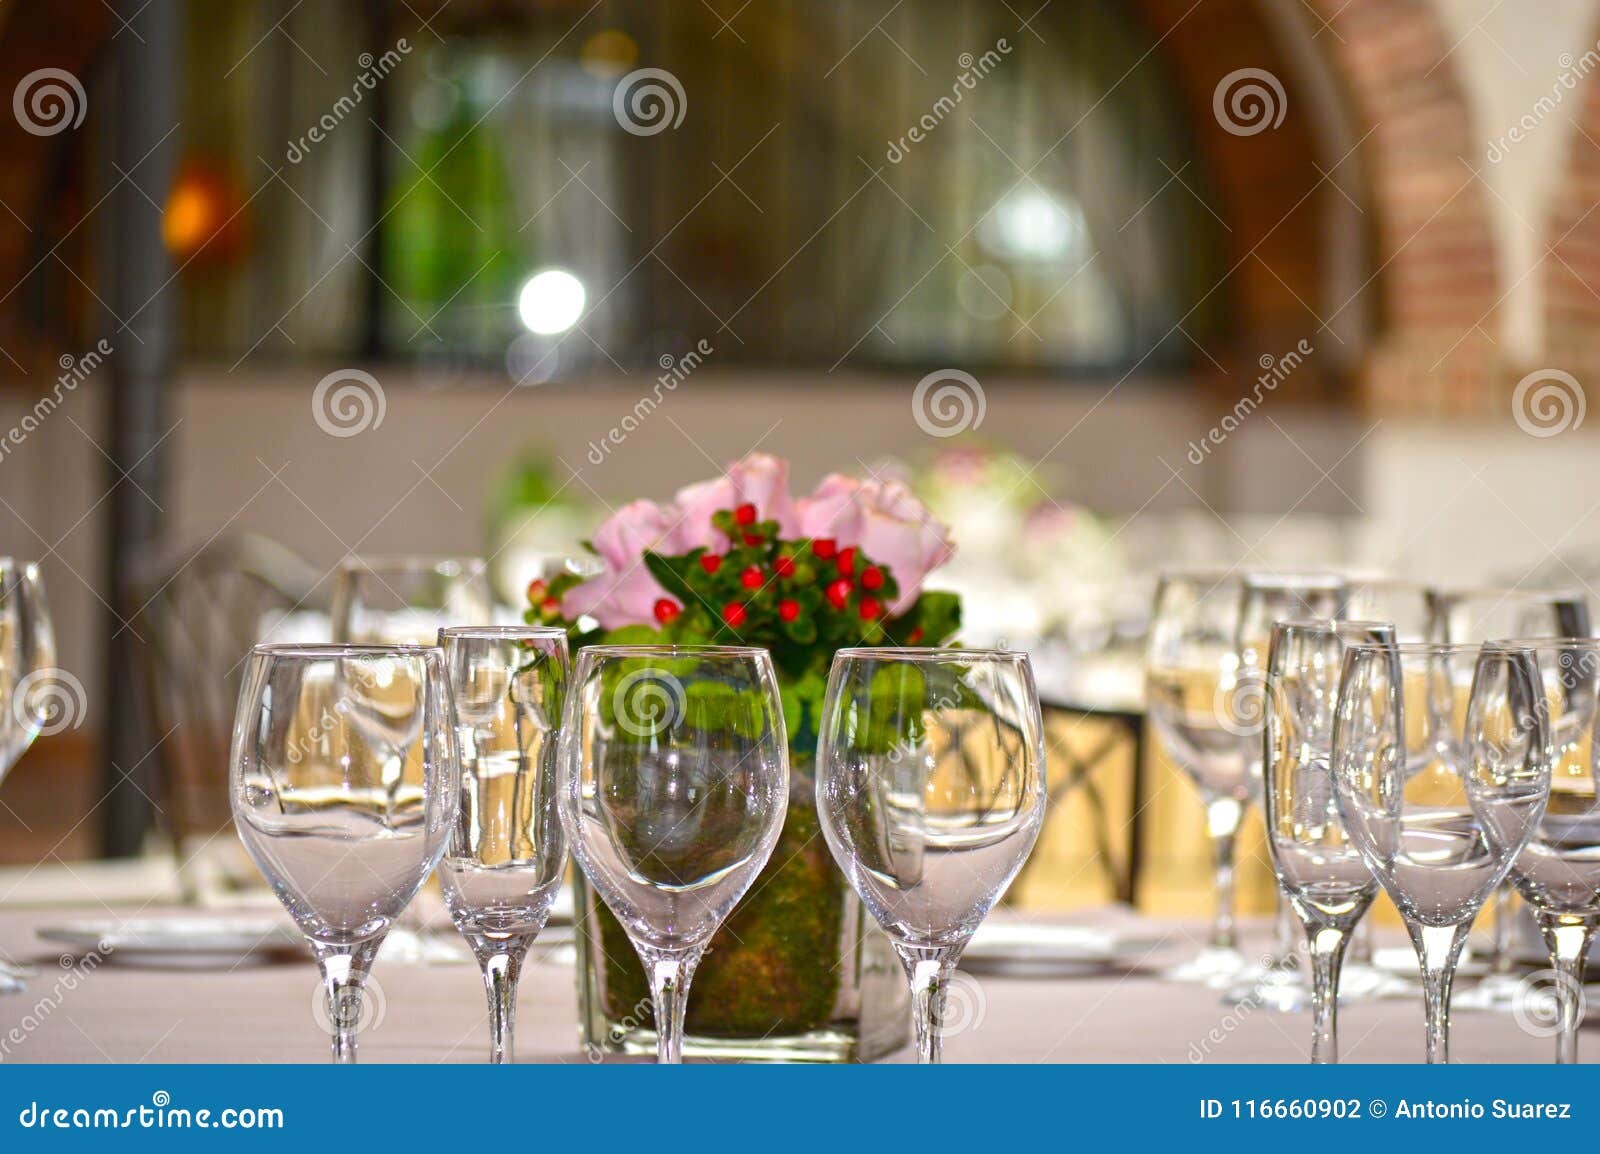 photograph of a table for the celebration of banquets.